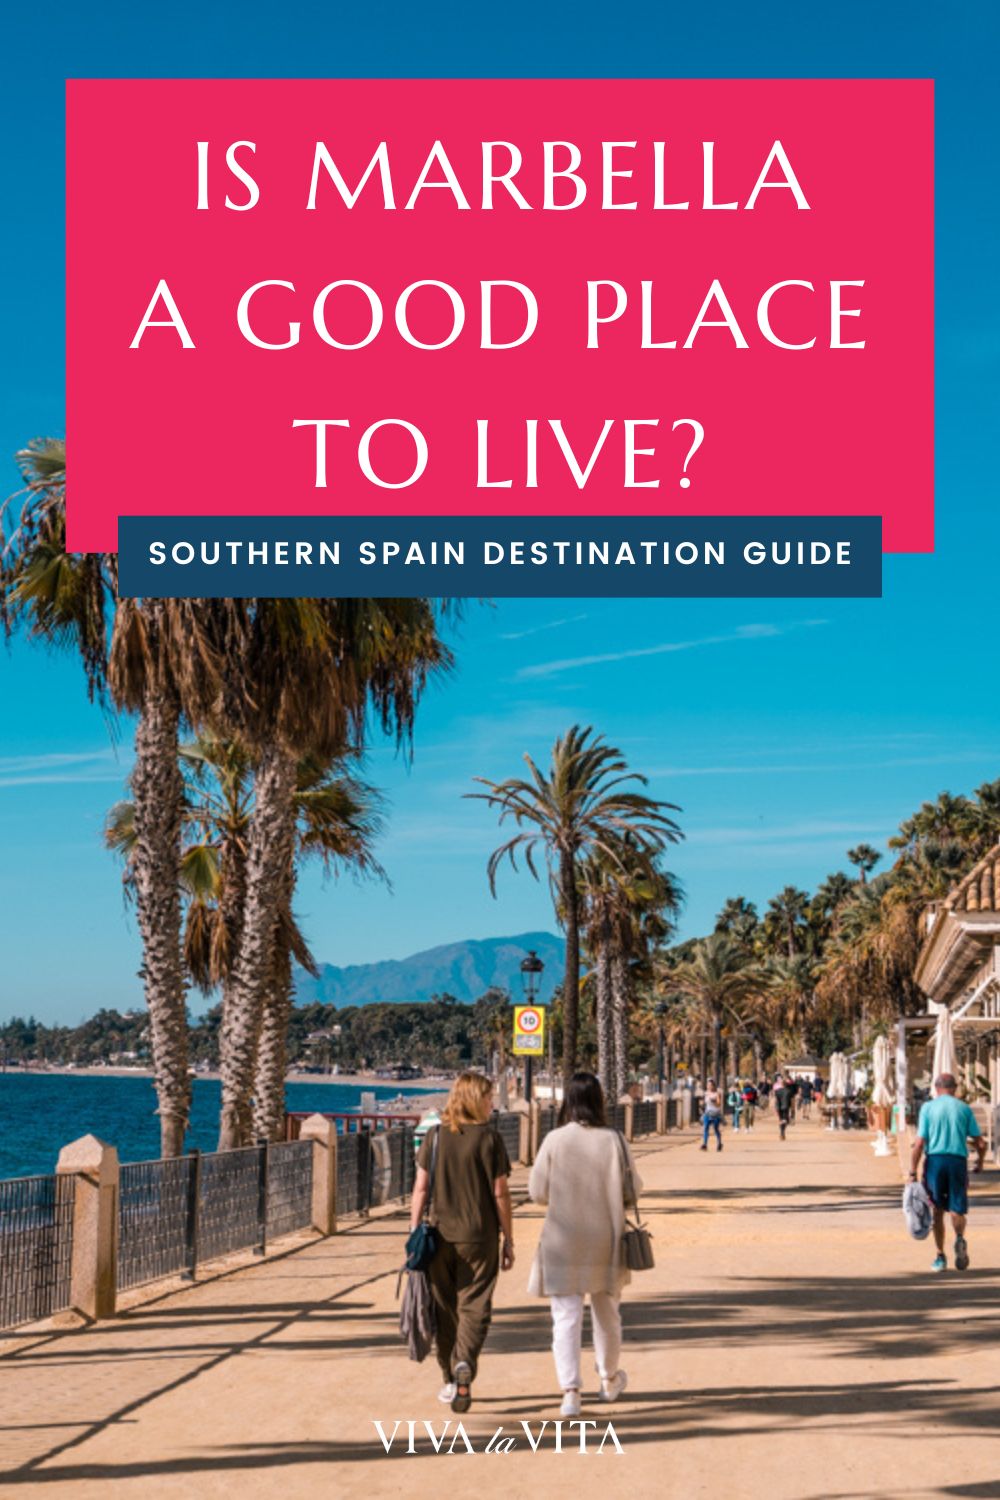 pinterest image showing the Golden mile coastal promenade in marbella in Costa del Sol in Southern Spain, with the headline - is marbella a good place to live